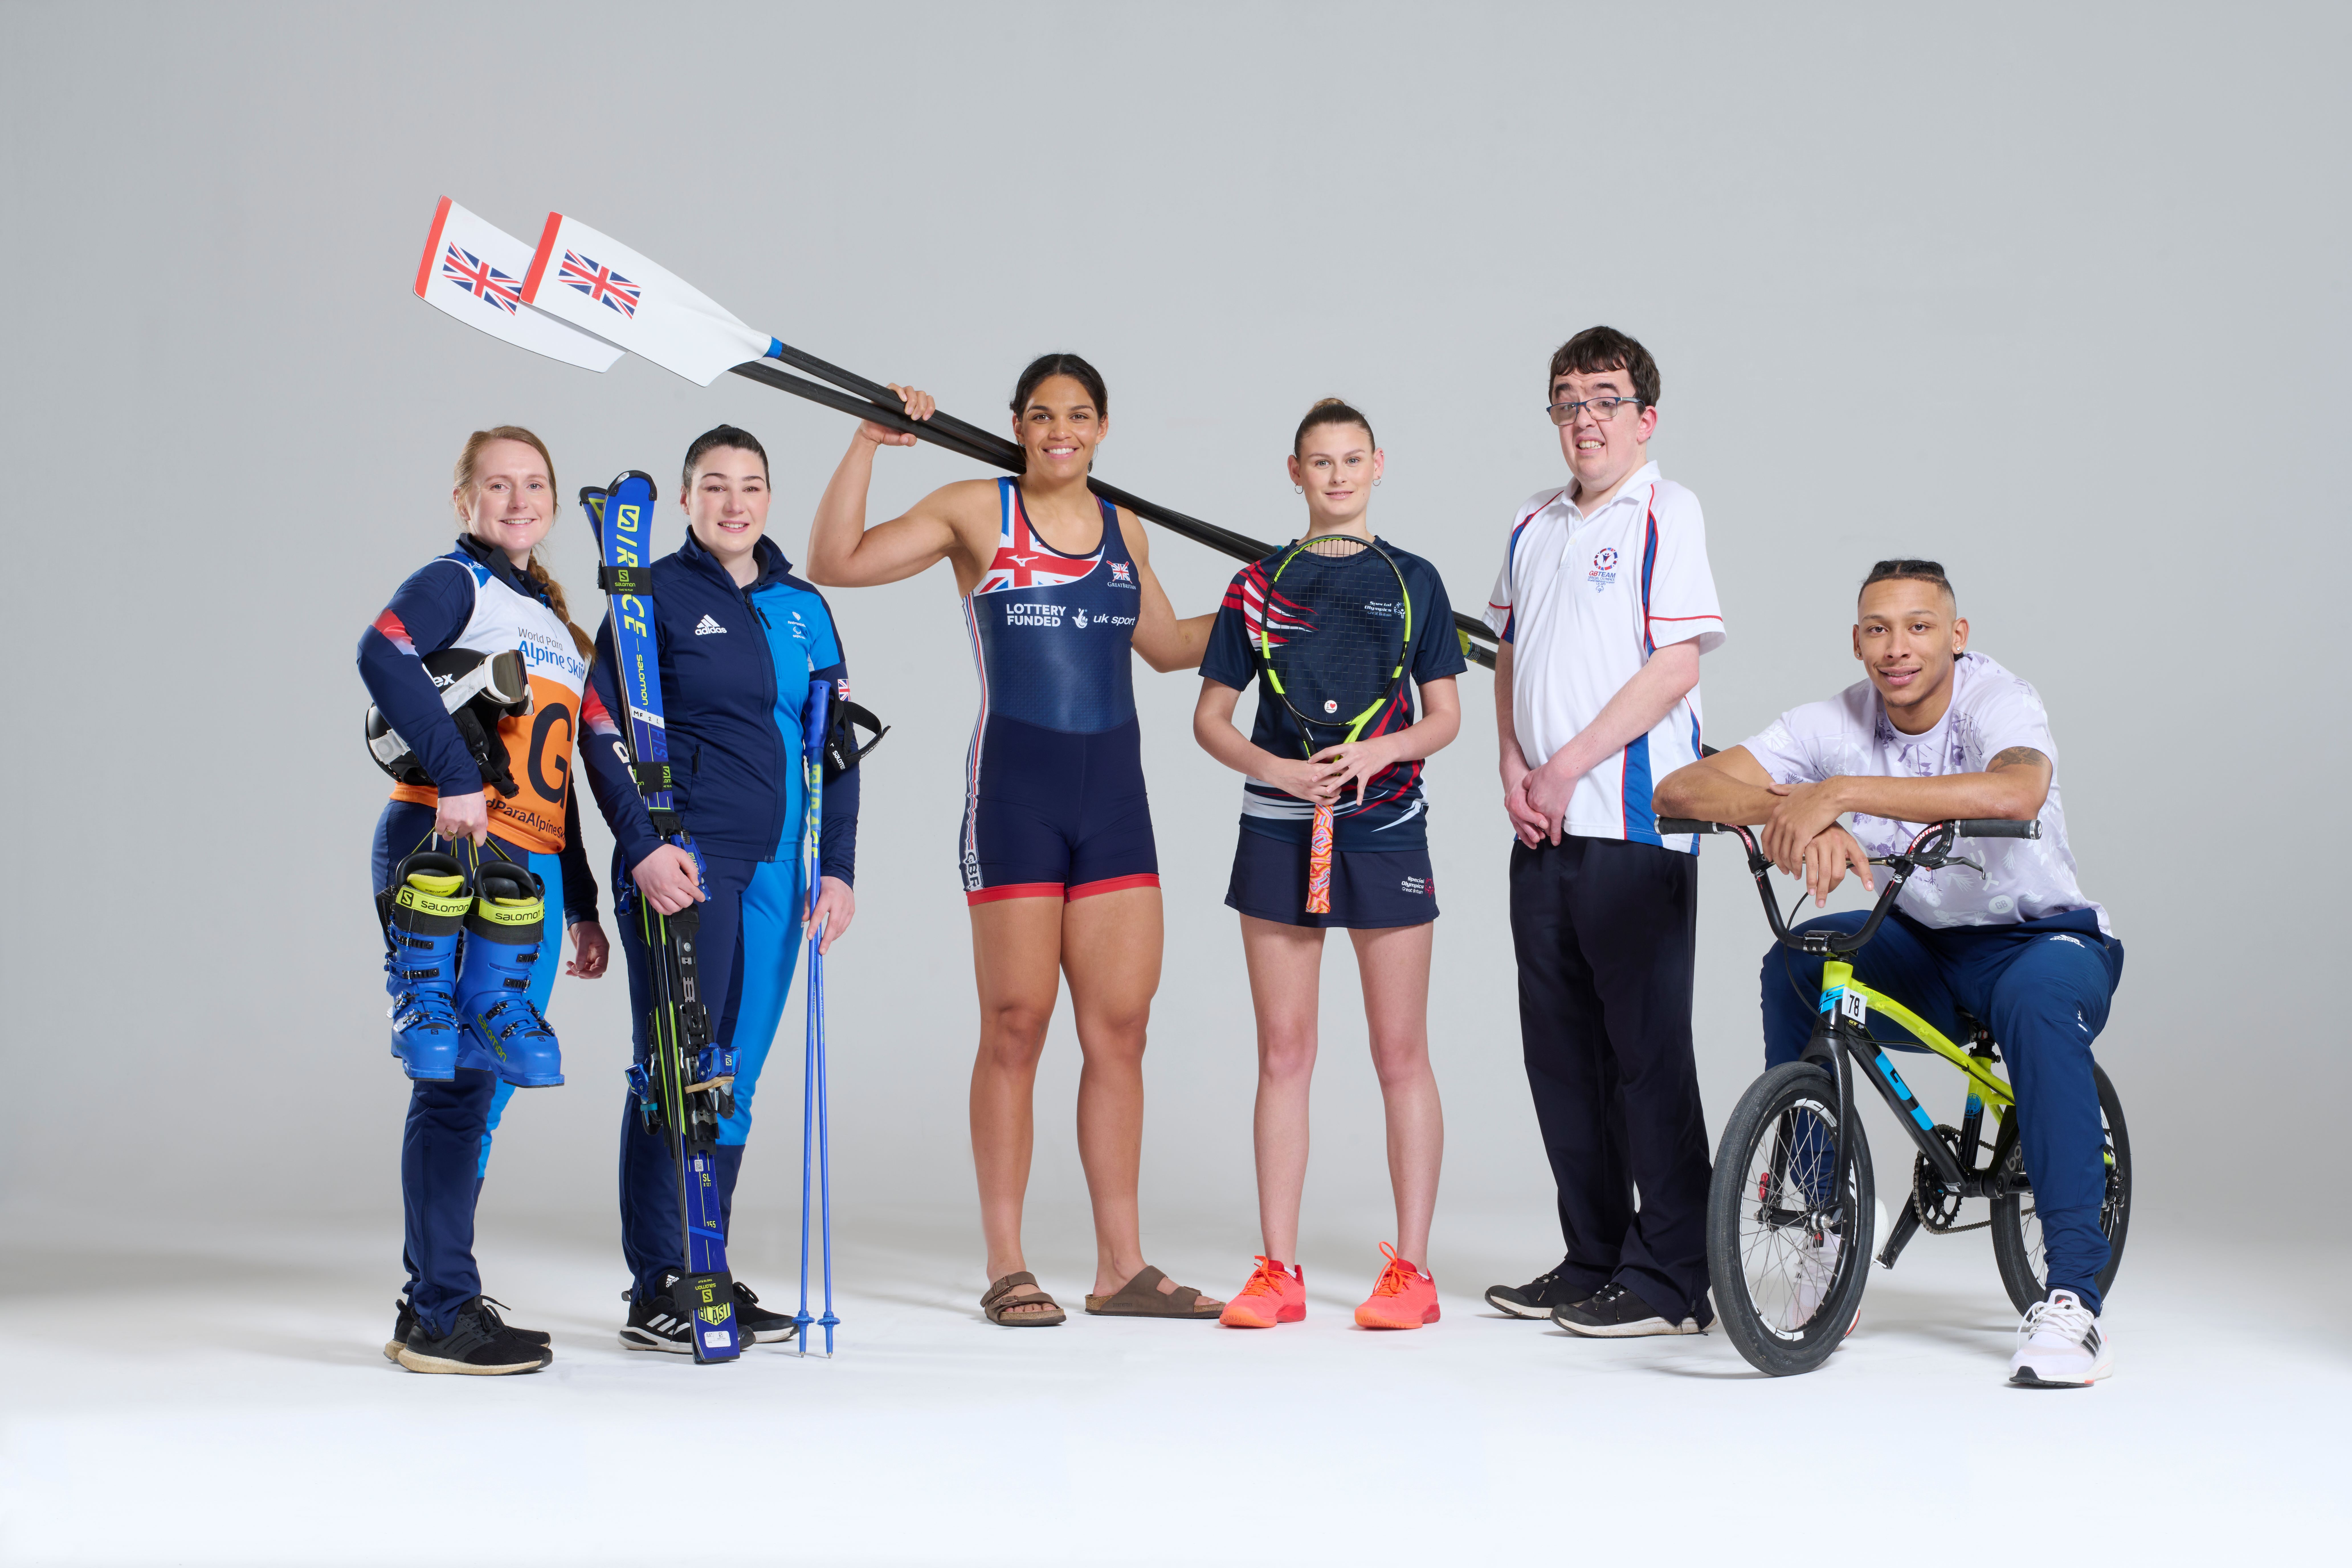 British athletes faces of powerful diversity and inclusion campaign